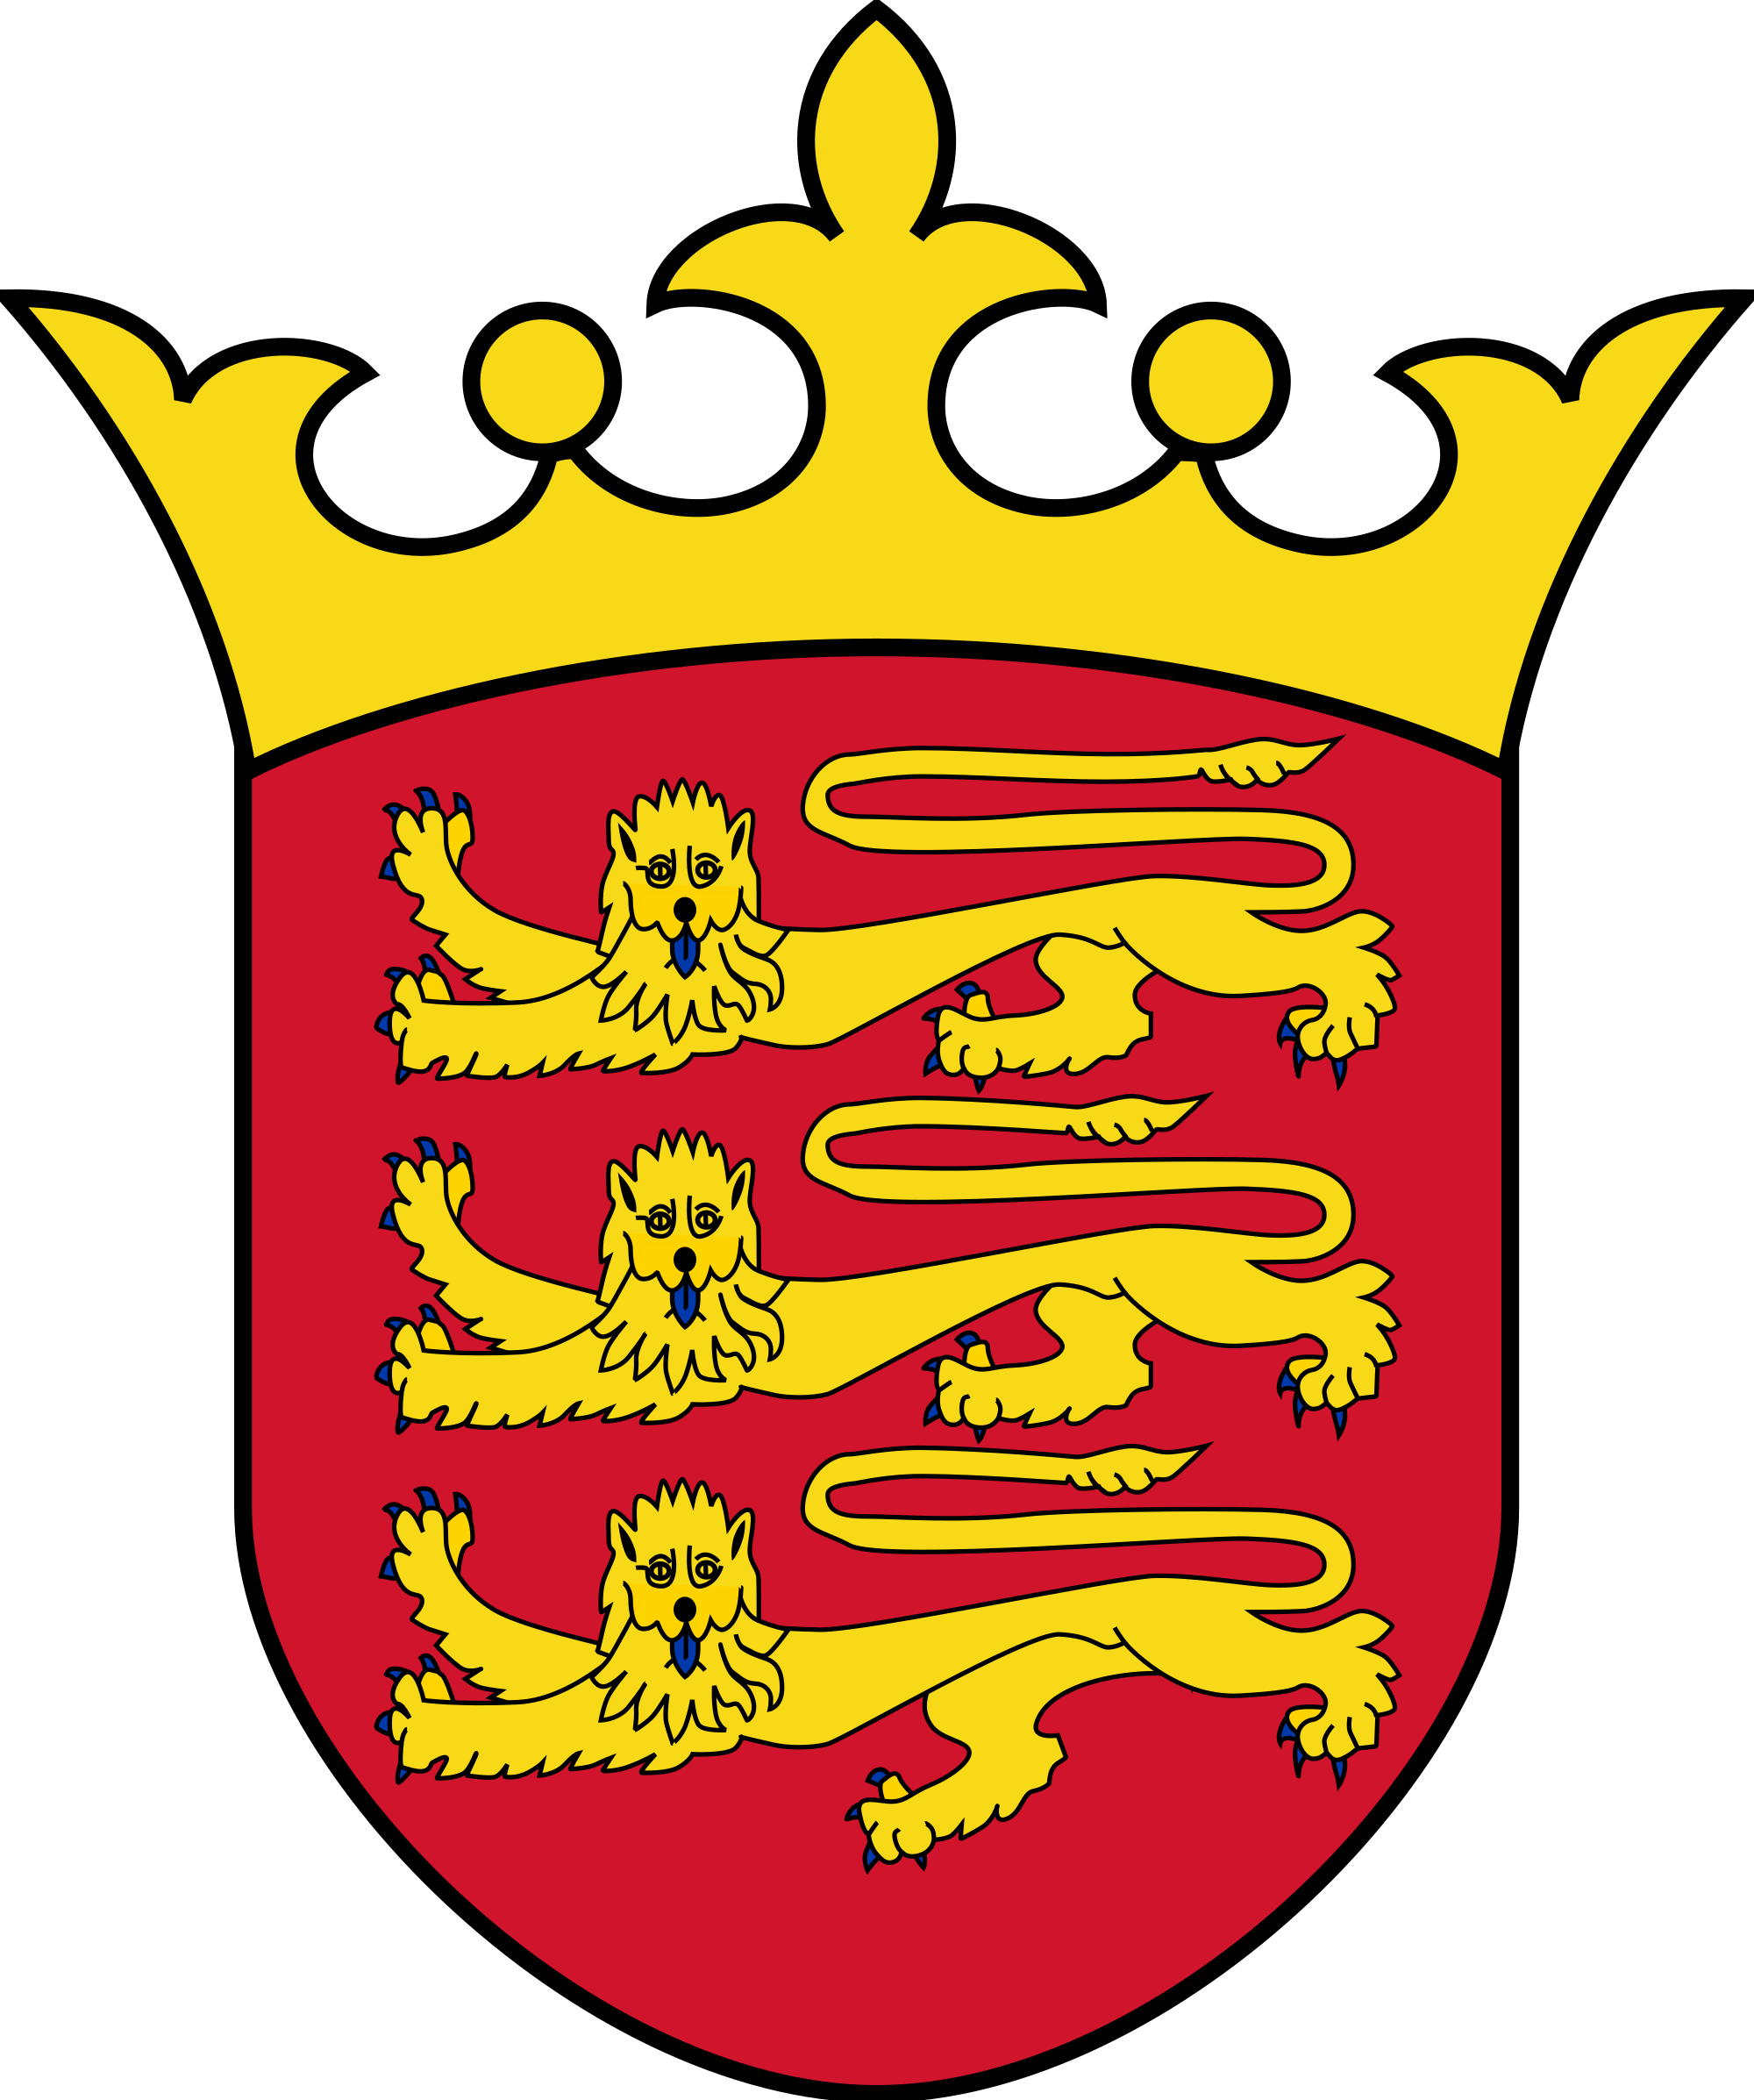 File:Coat of arms of Jersey.svg